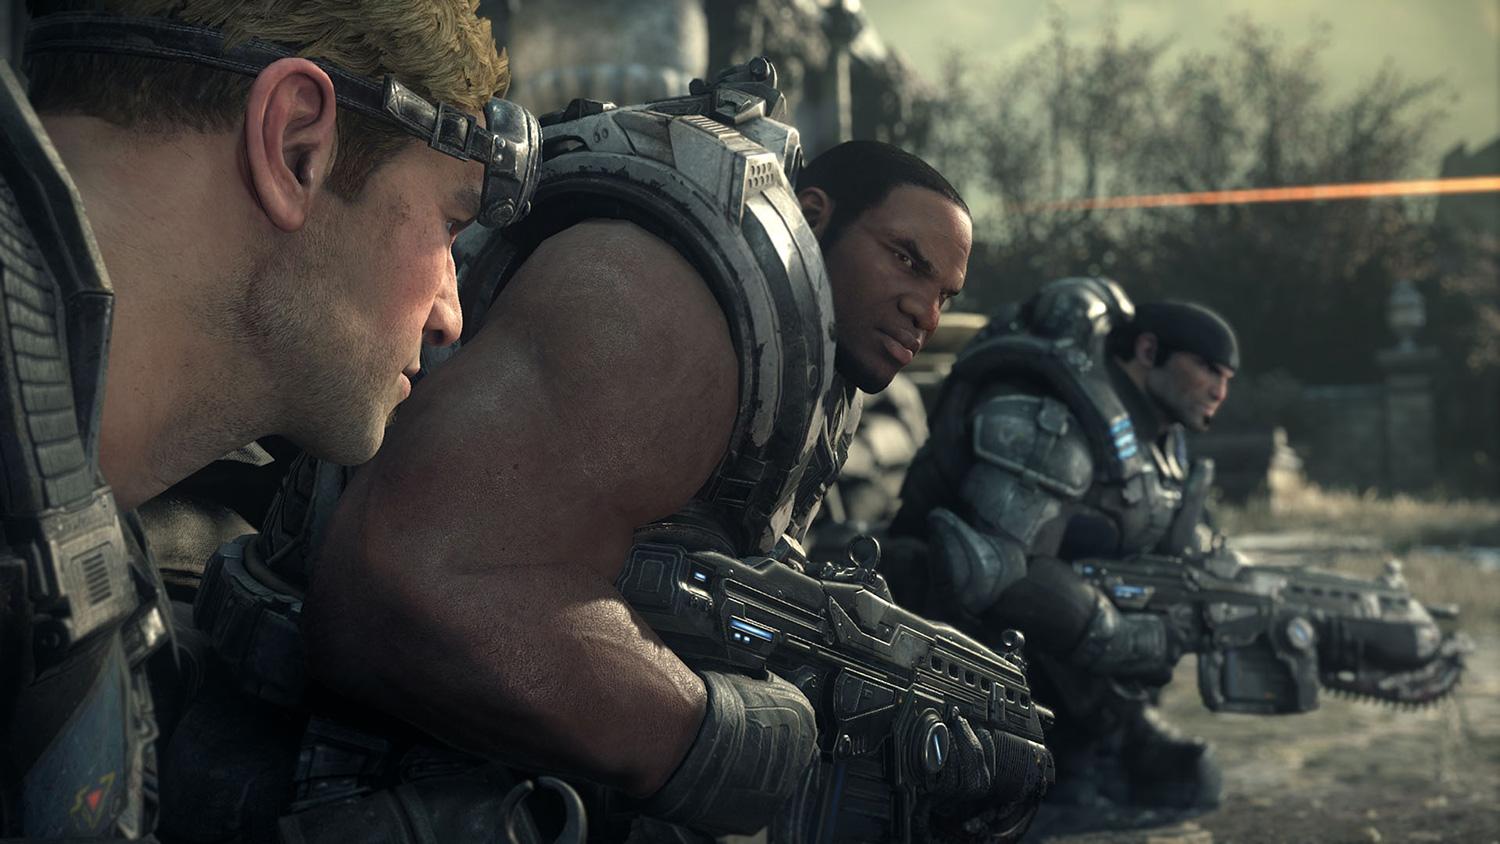 Gears of War and Fortnite studio is working on an Xbox exclusive